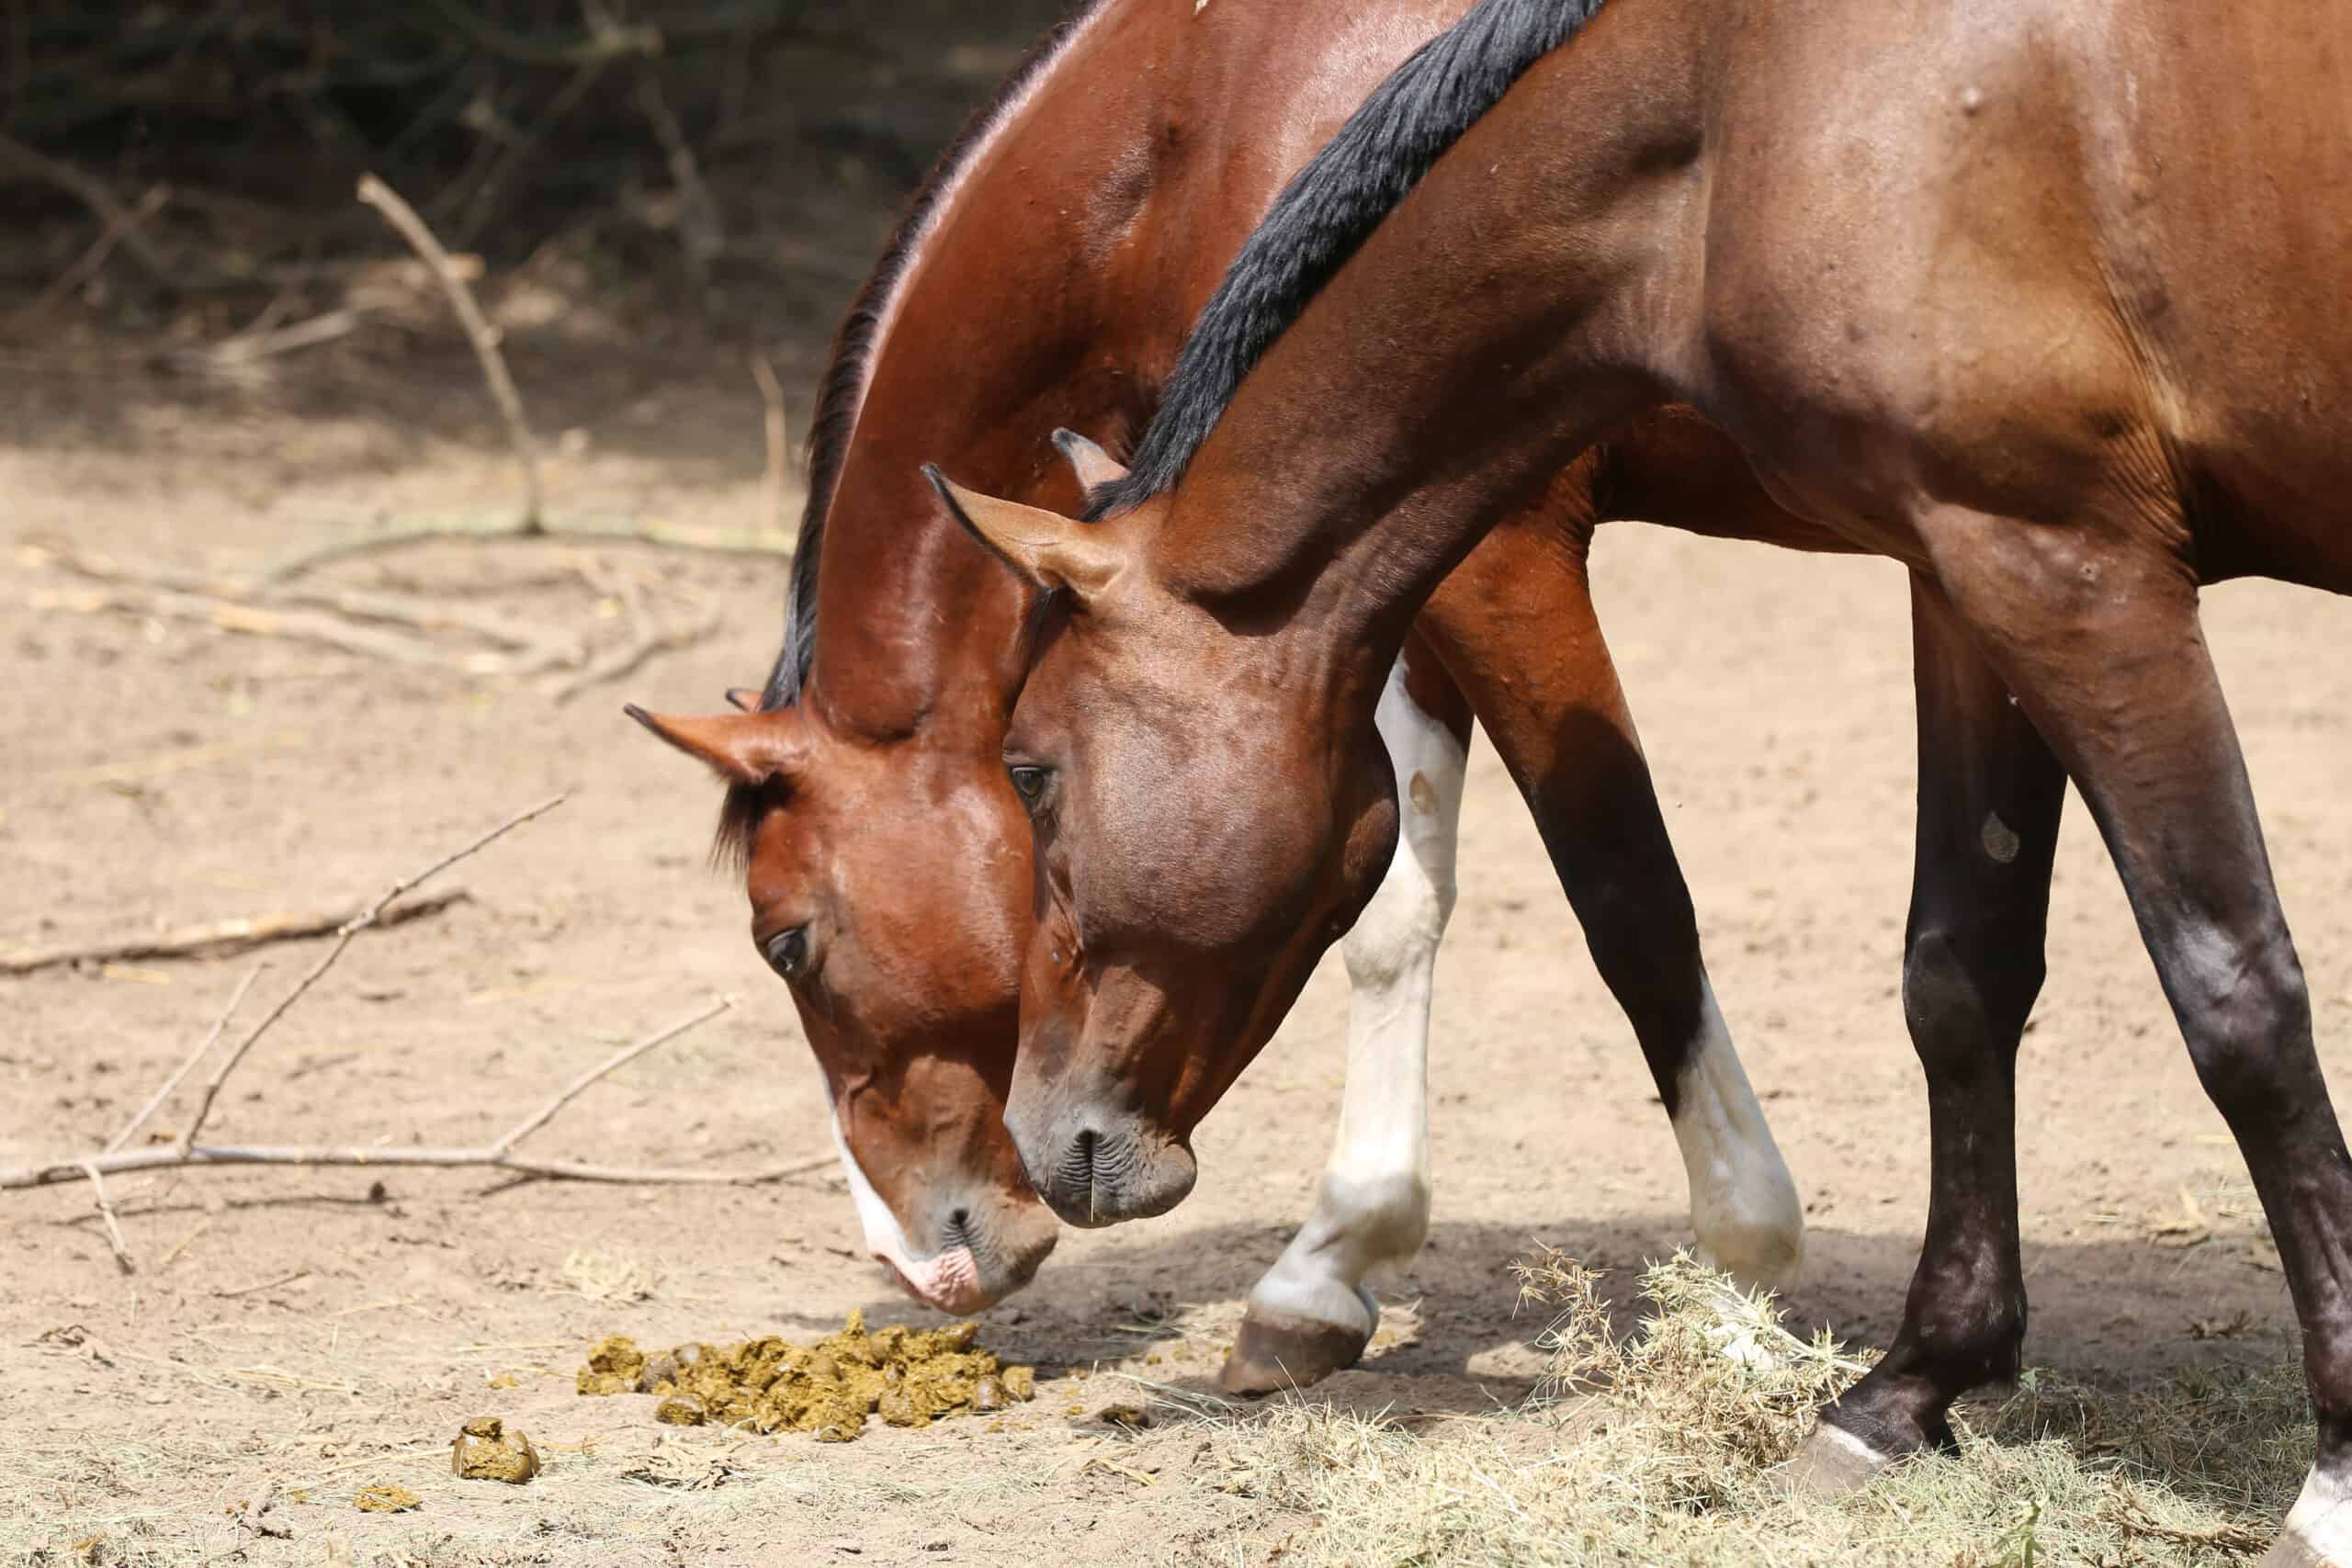 why do horses eat feces?